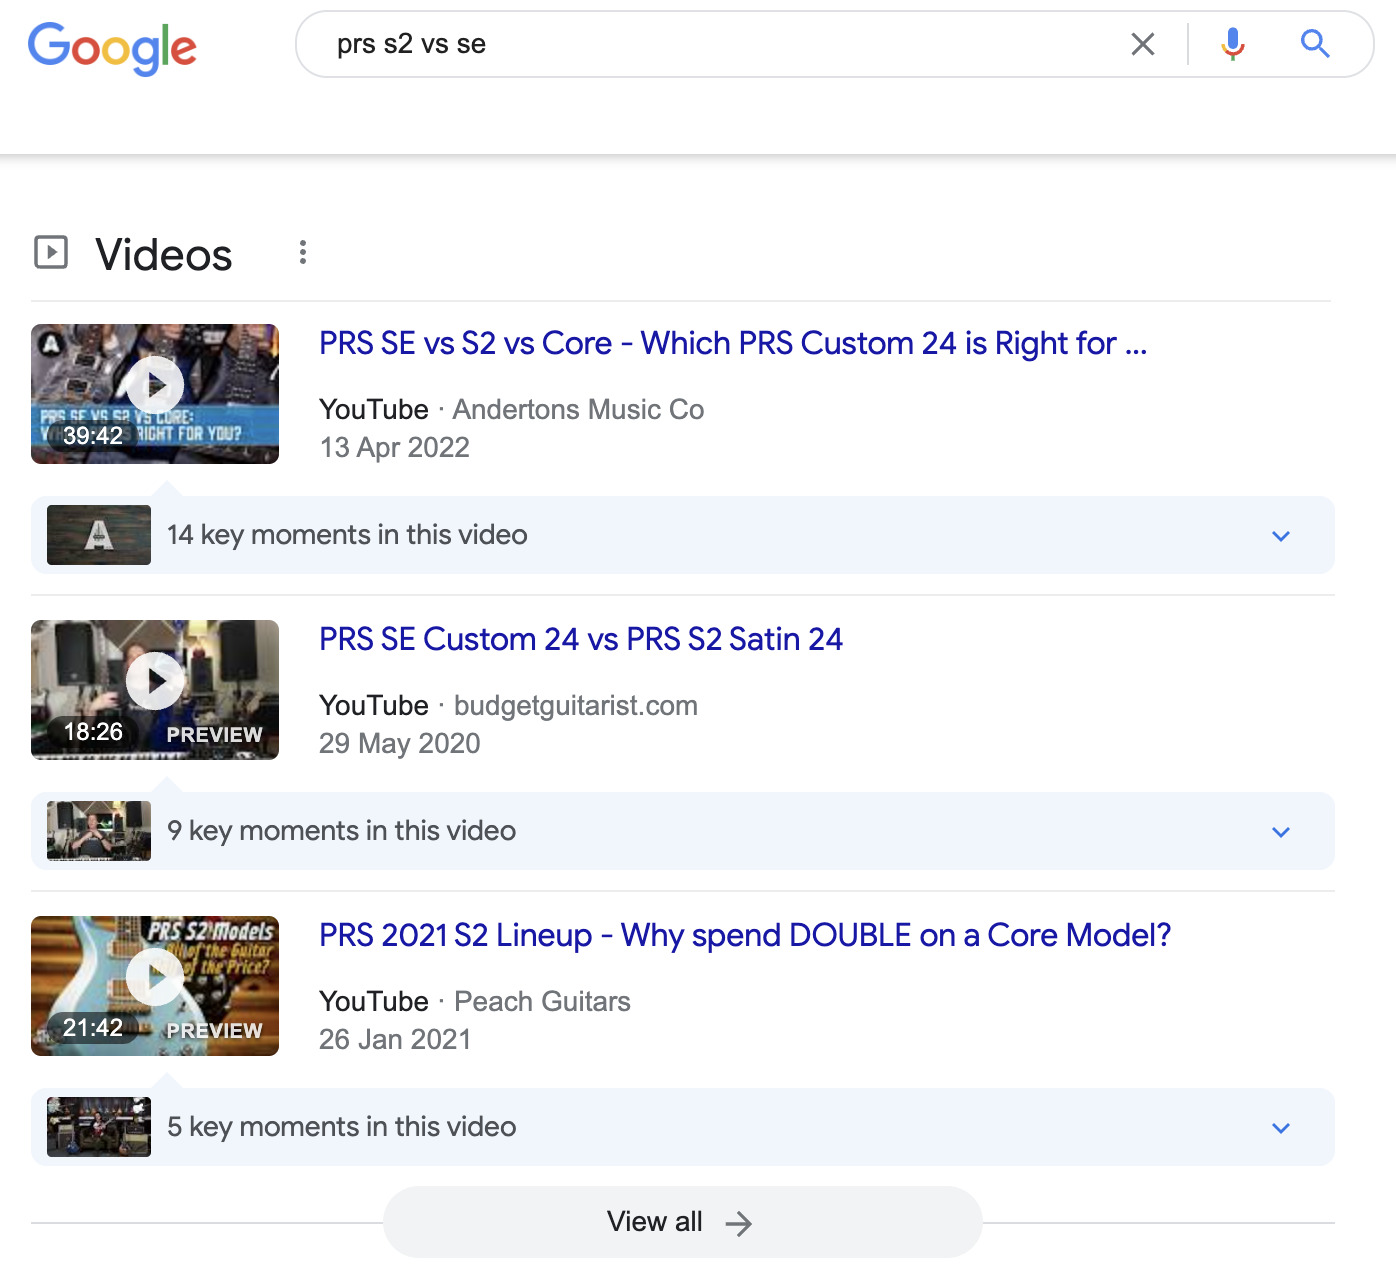 Video SERP feature for "prs s2 vs se"